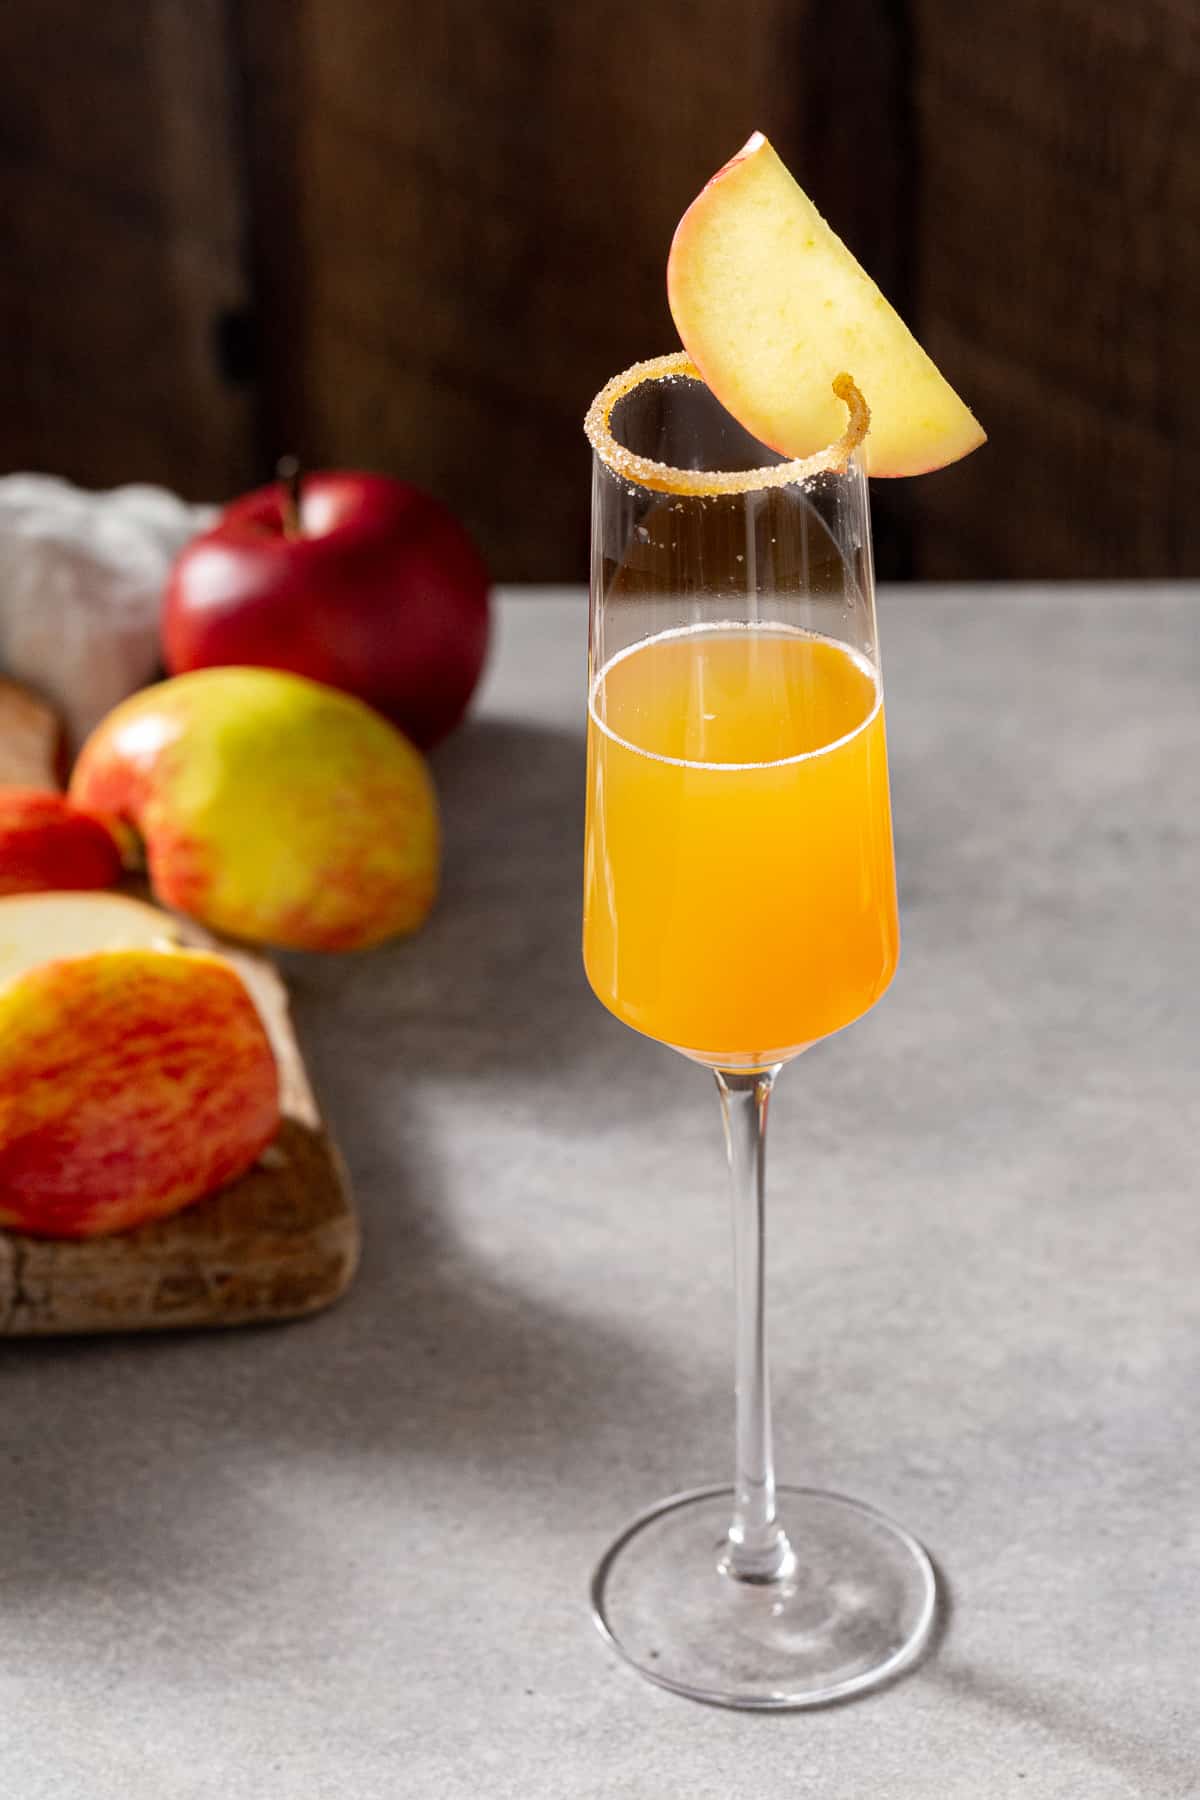 An Apple Cider mimosa on a gray countertop in a Champagne flute. Cinnamon sugar is coating the rim of the glass and an apple slice is attached to the rim as a garnish. In the background to the left of the drink is a pile of cut up fresh apple pieces.